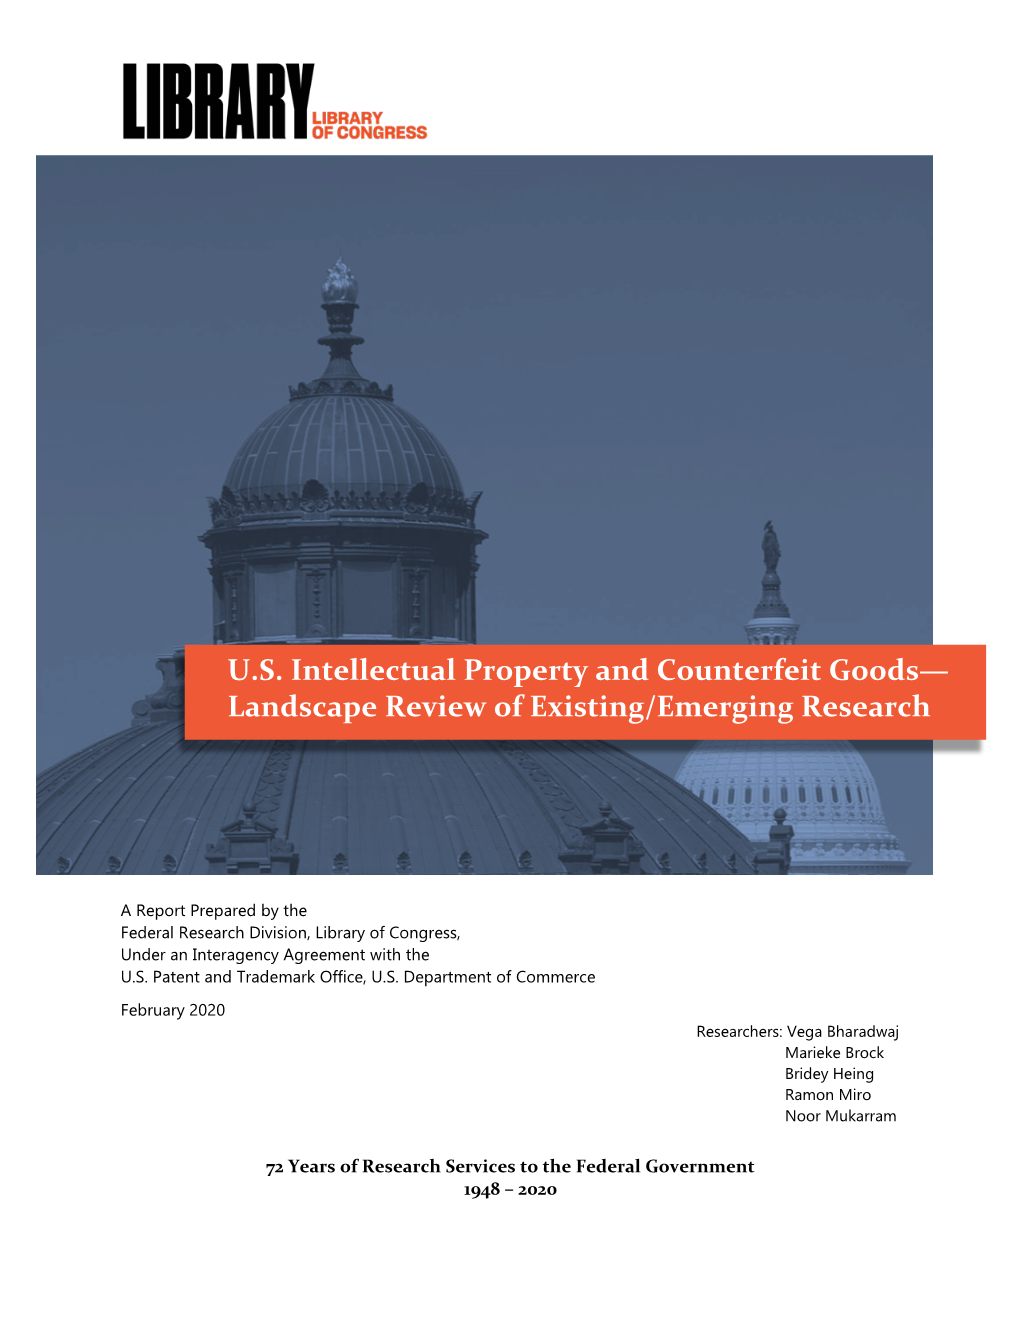 US Intellectual Property and Counterfeit Goods